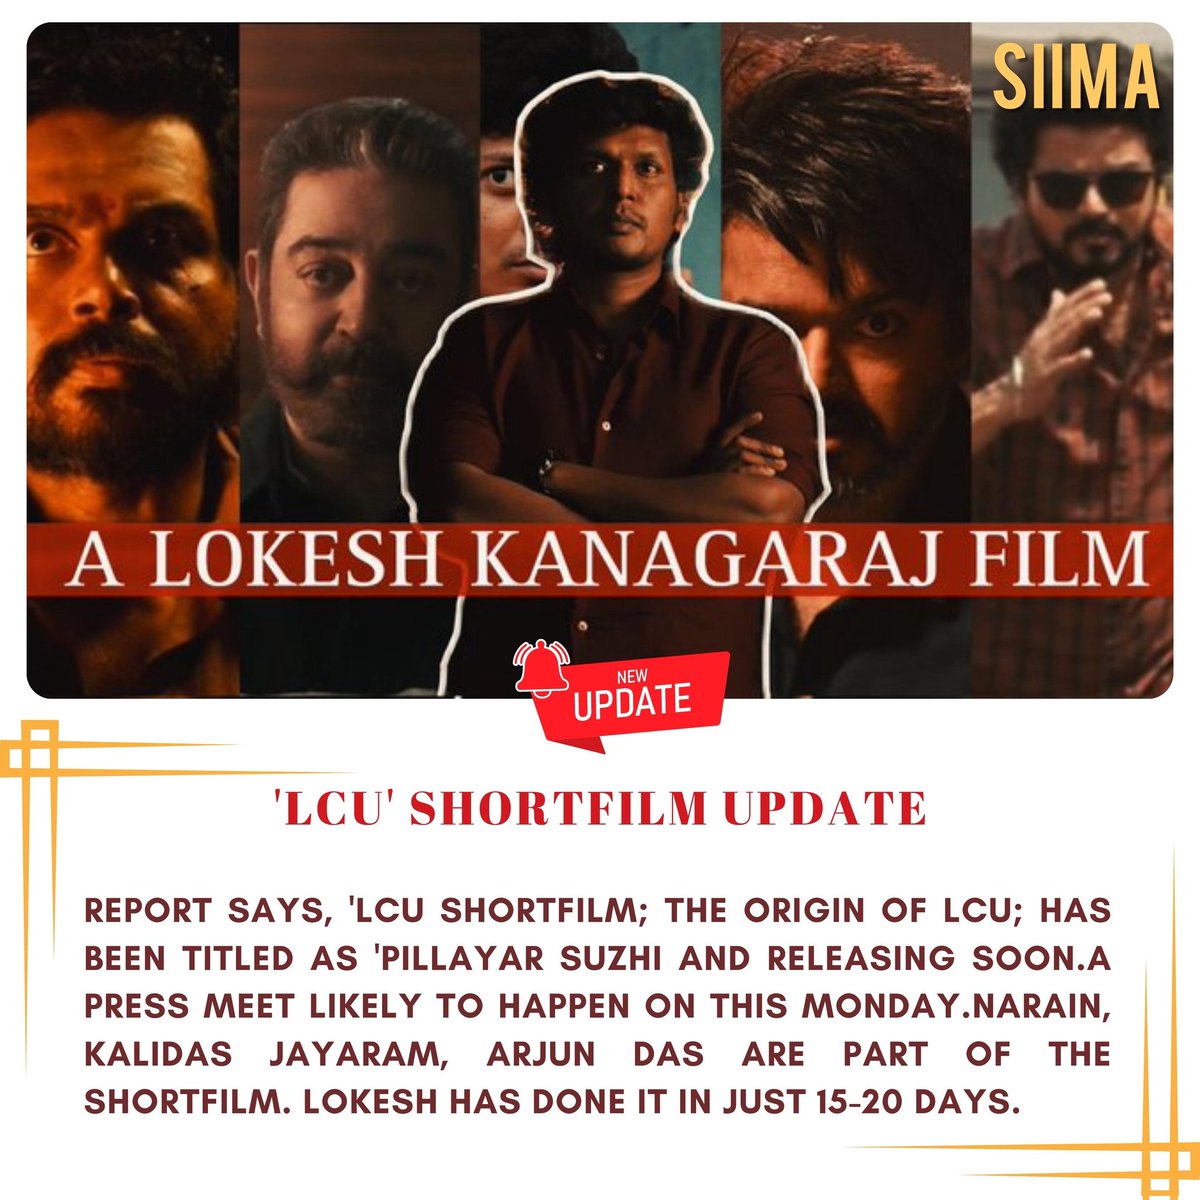 Exciting news for all LCU fans! The short film 'Pillayar Suzhi', marking the origin of the Lokesh Cinematic Universe (LCU), is set to release soon. 🎬 

A press meet is likely to happen this Monday. 🌟 Starring the talented Narain, Kalidas Jayaram, and Arjun Das, and directed by